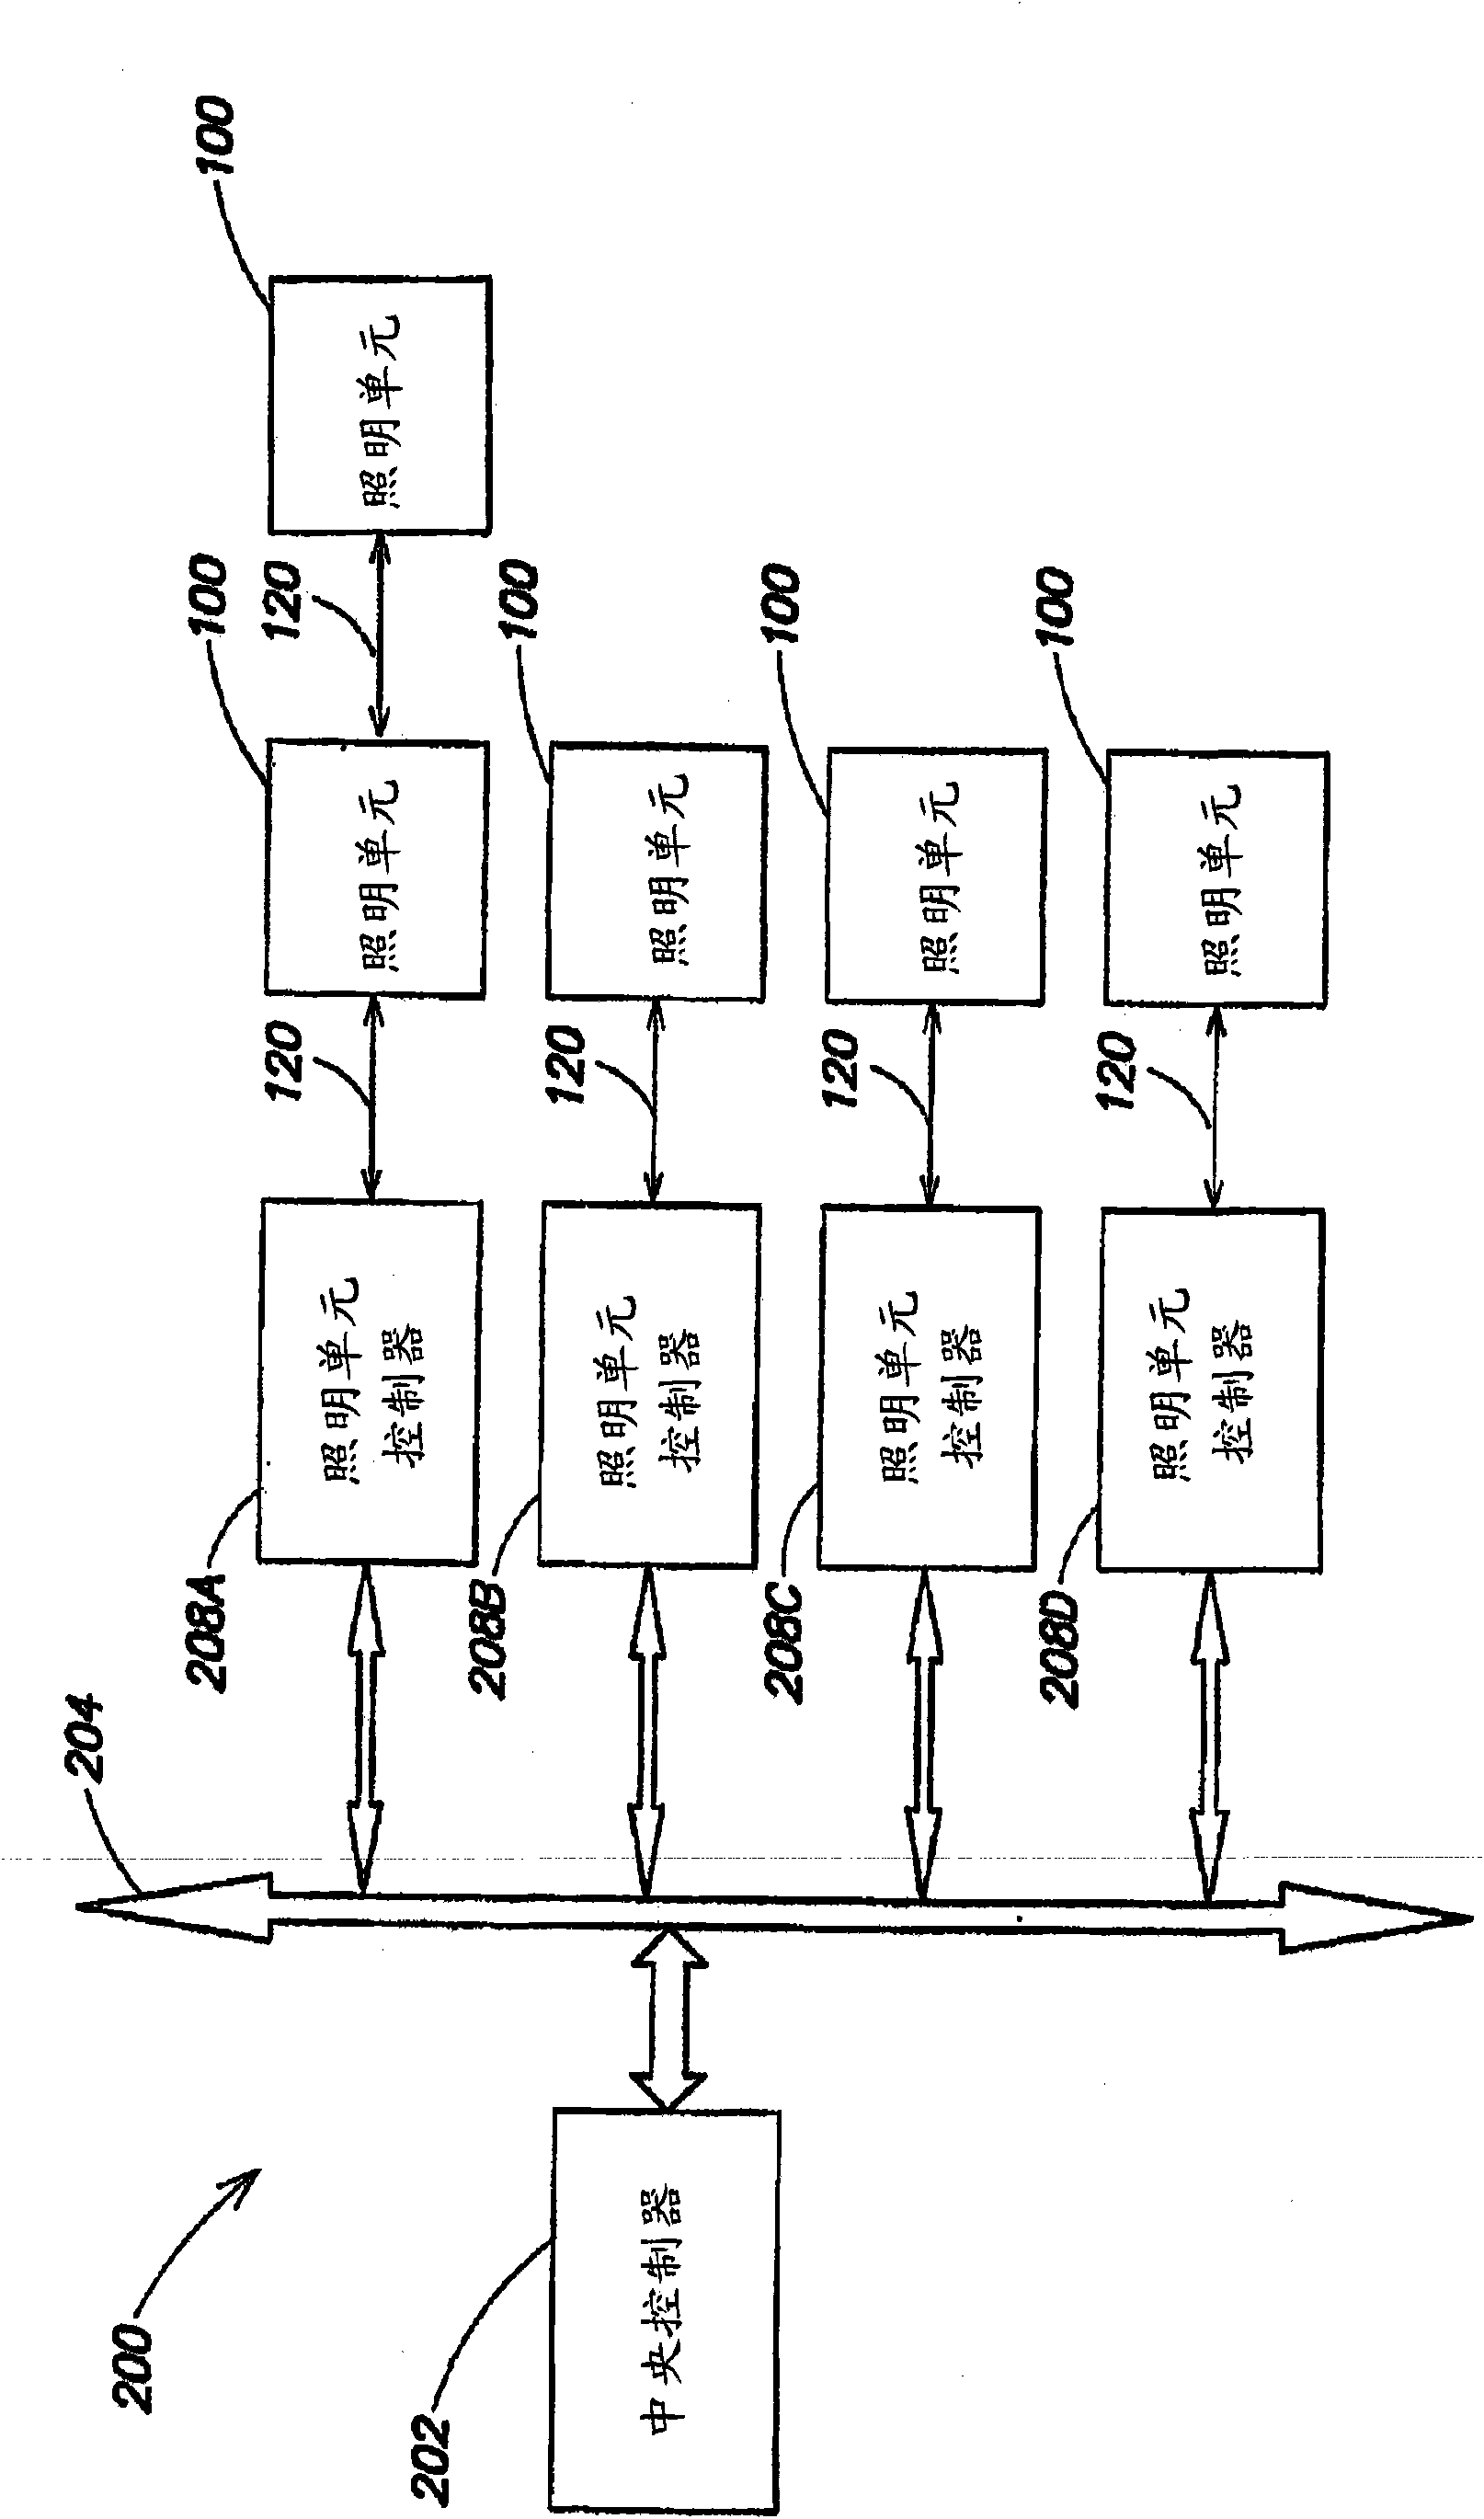 Methods and apparatus for providing led-based spotlight illumination in stage lighting applications